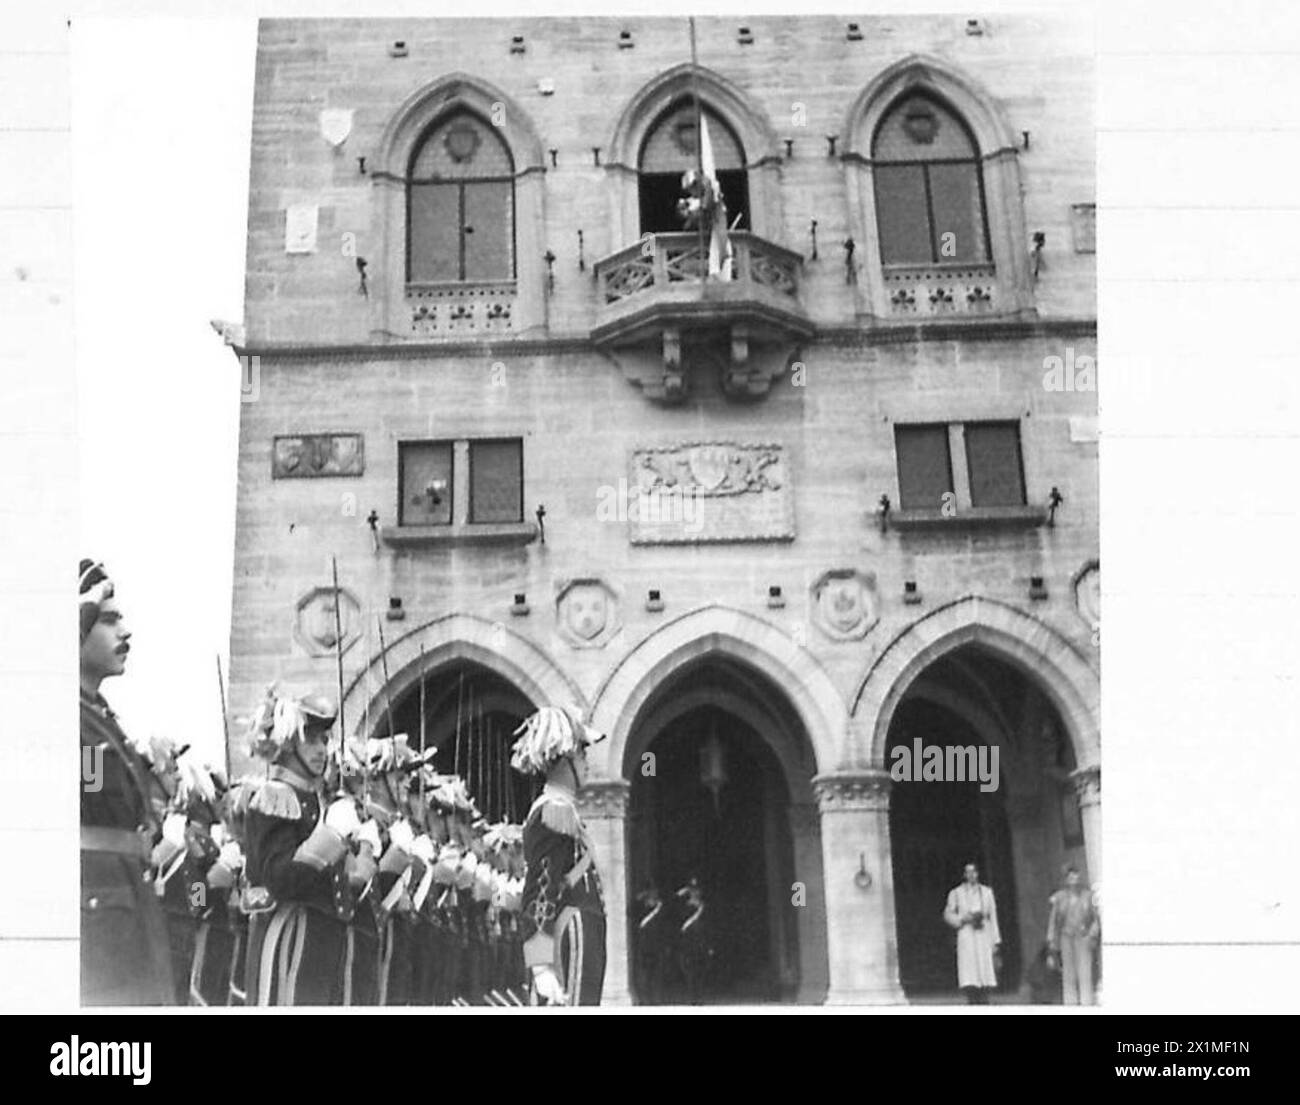 ITALY : SAN MARINO ELECTS ITS NEW REGENTS - The troops present arras to the strains of the National Anthem, as the flag of the Republic is unfurled on the balcony of the Regent's Palace, British Army Stock Photo